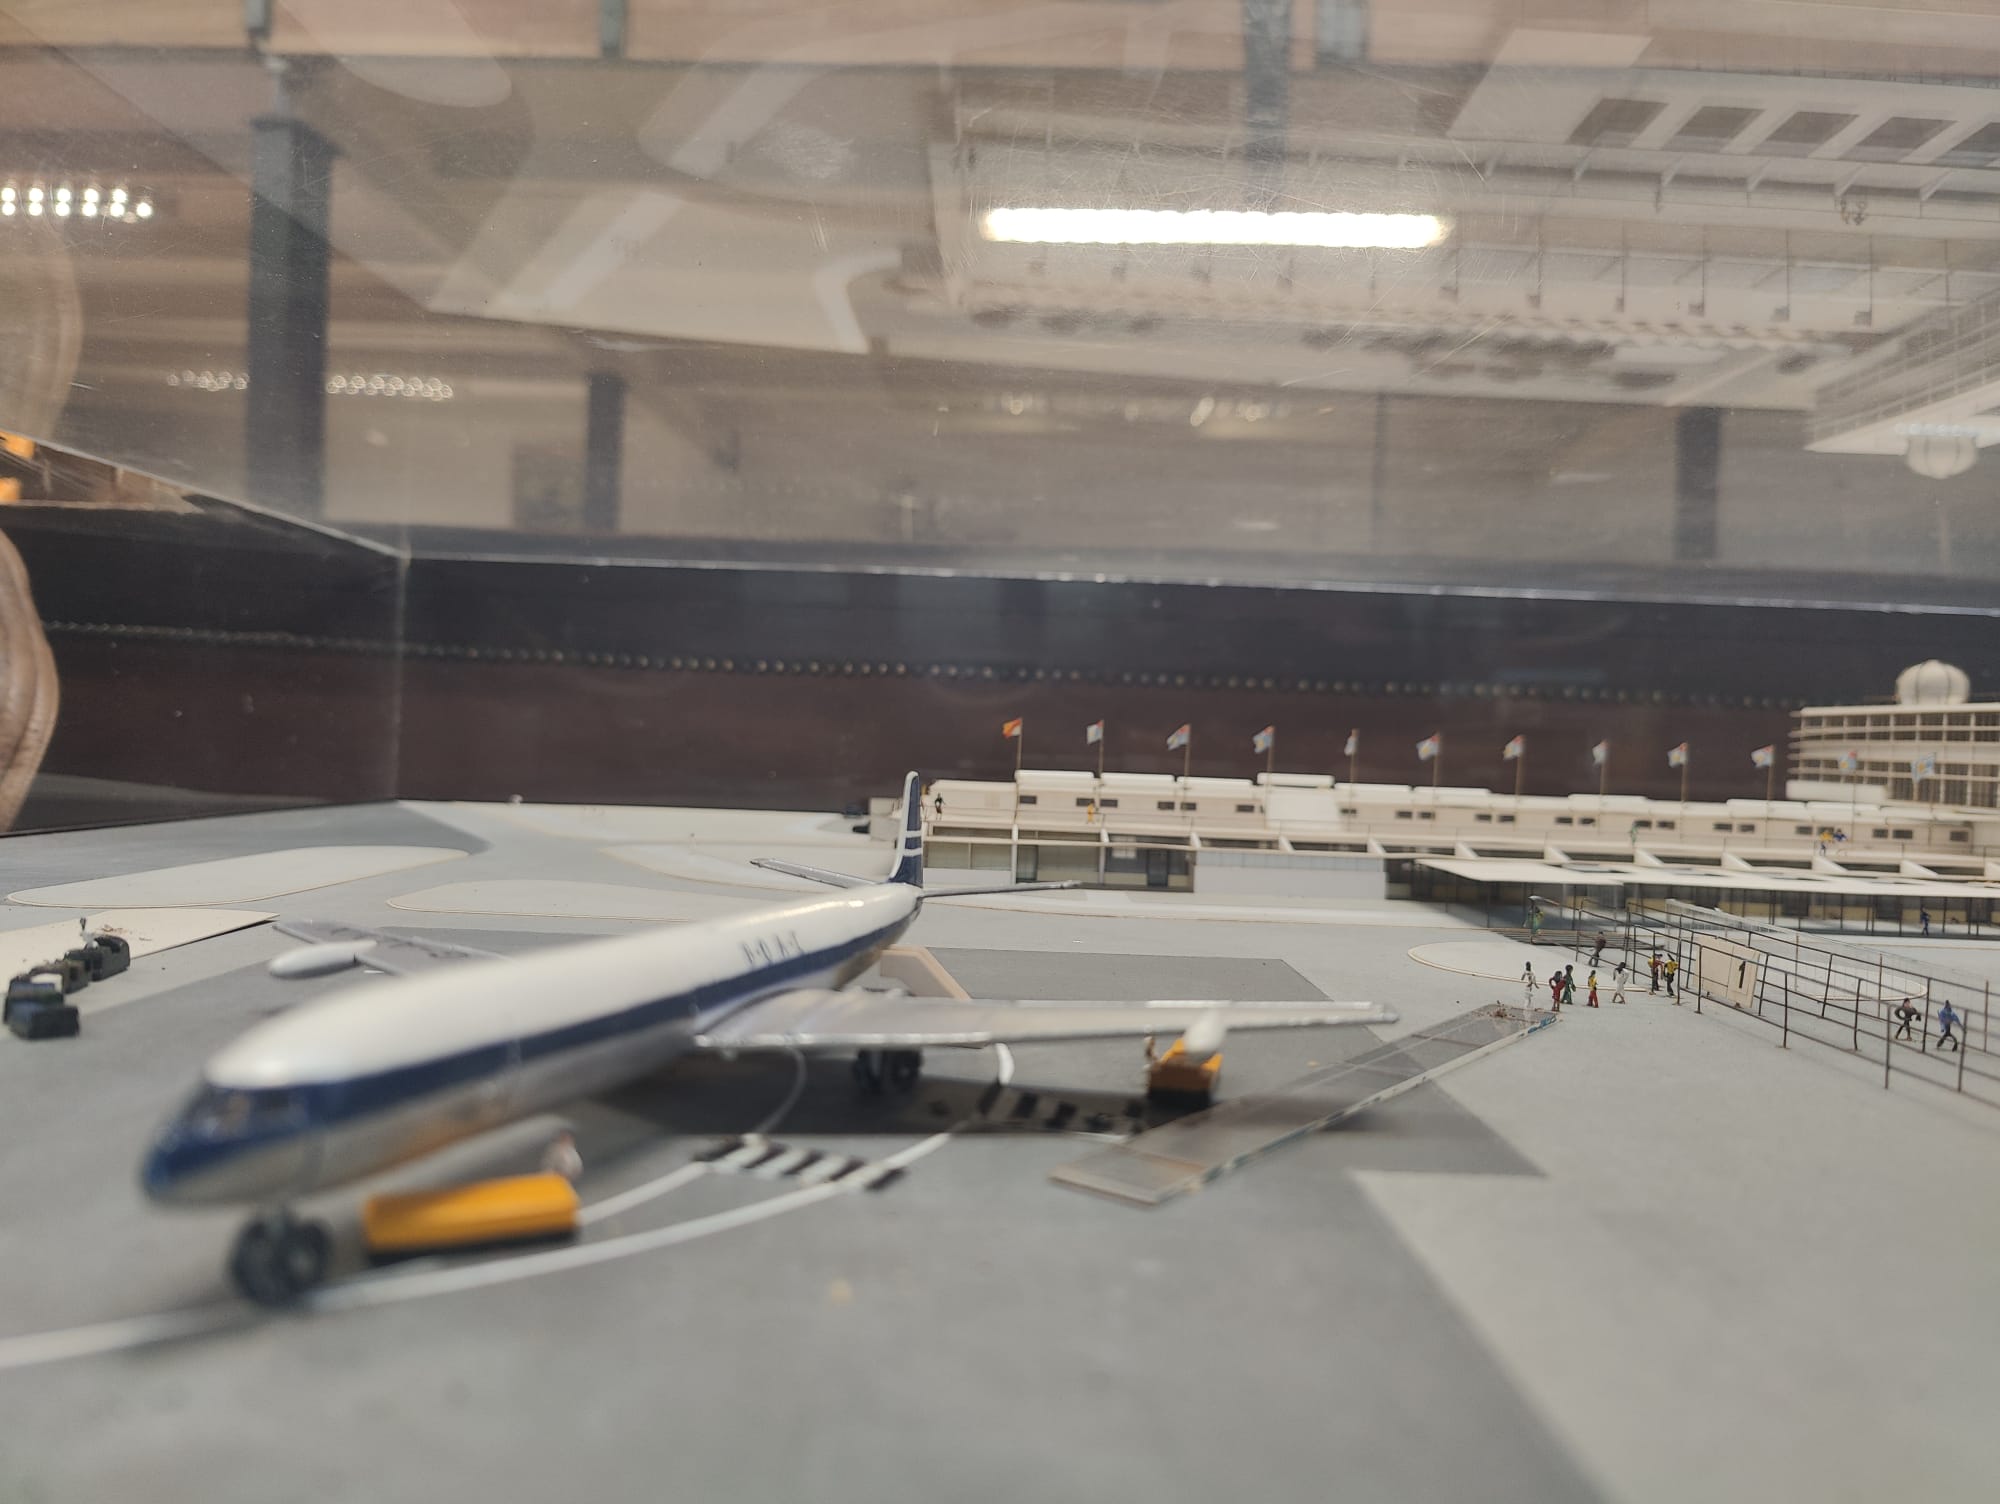 NORMAN & DAWBURN ARCHITECT'S MODEL OF PALISADOES AIRPORT - Image 9 of 9